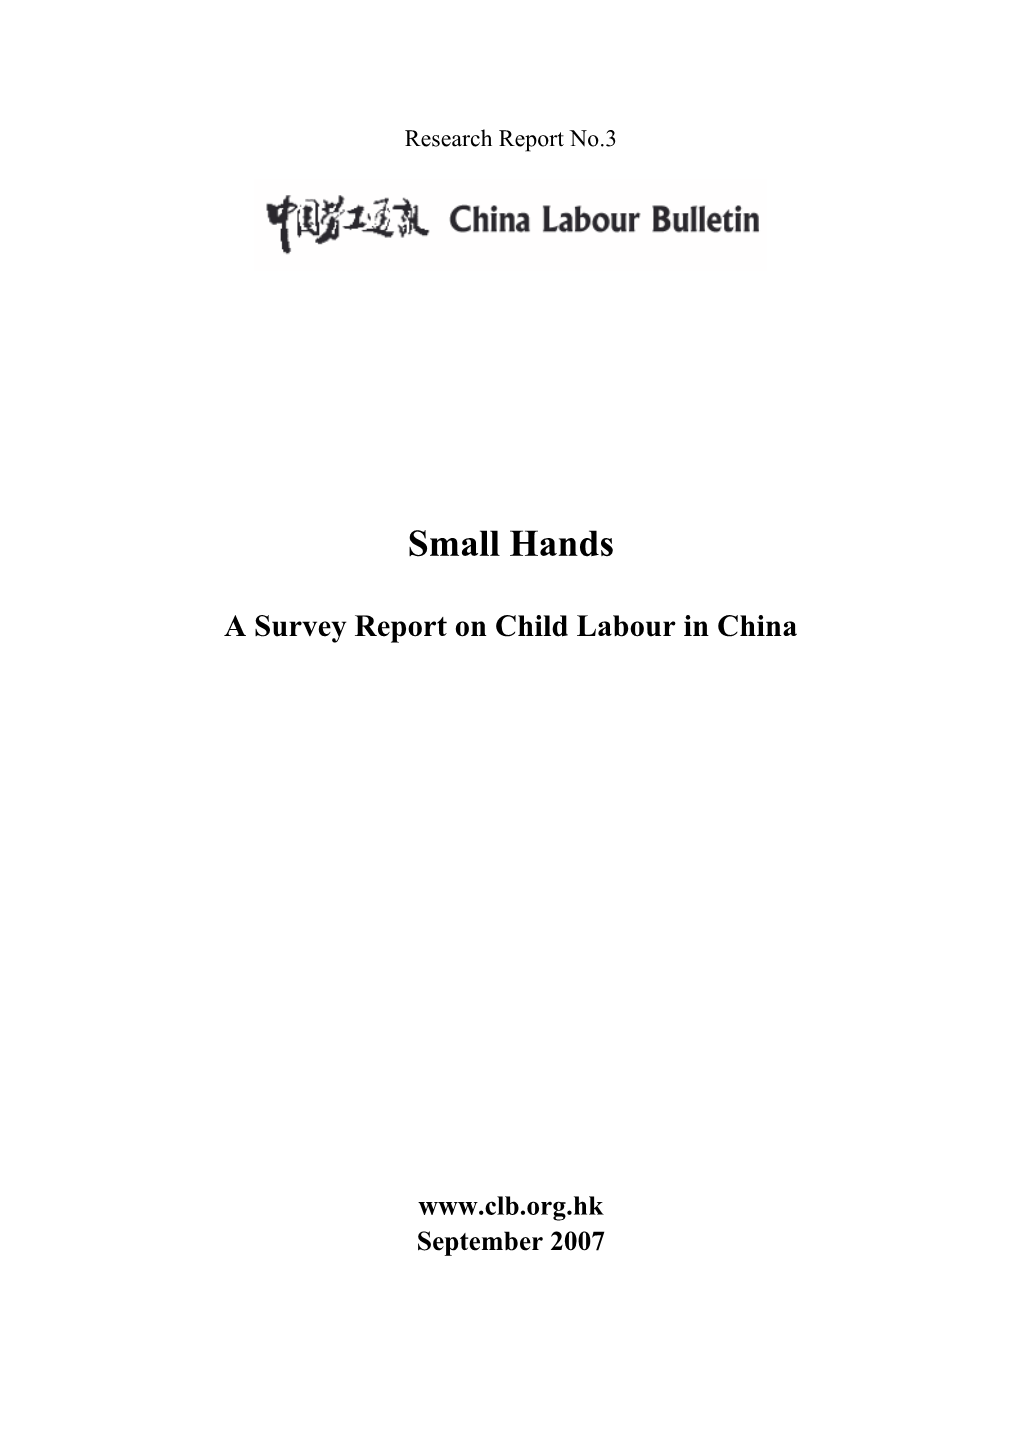 2008 Research Report on Child Labour